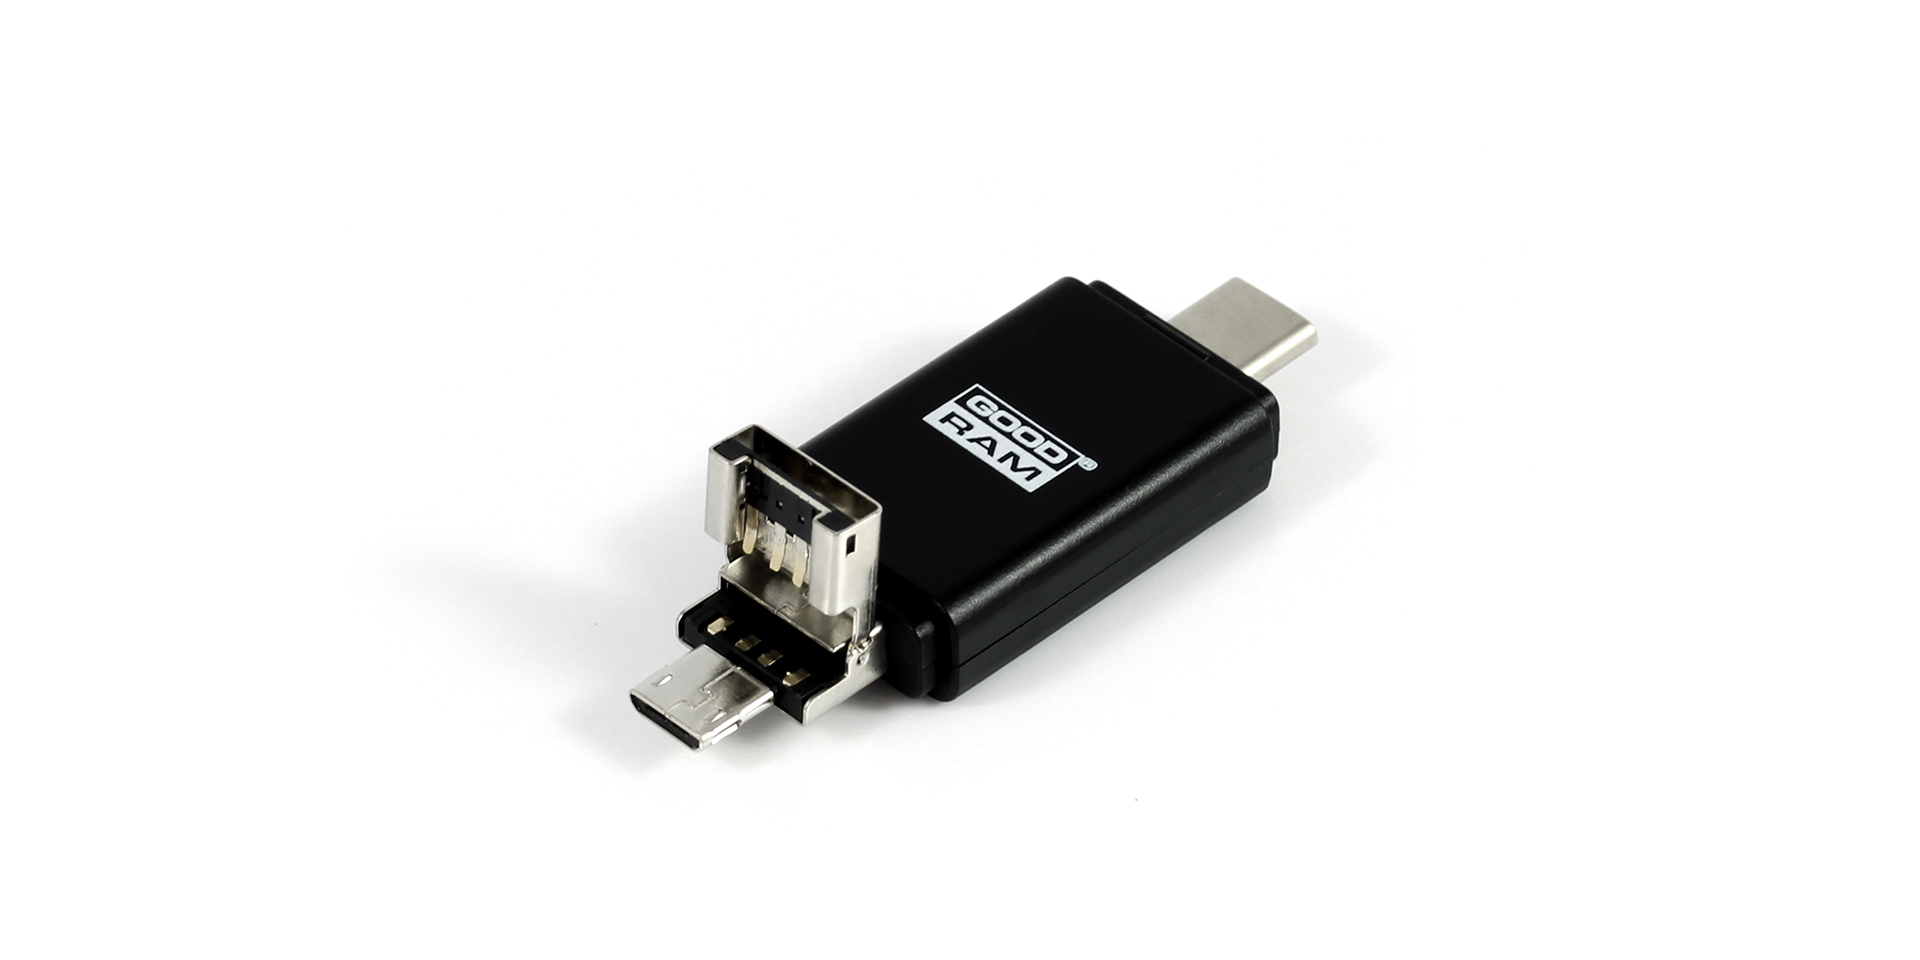 Card reader 3 USB type connectors